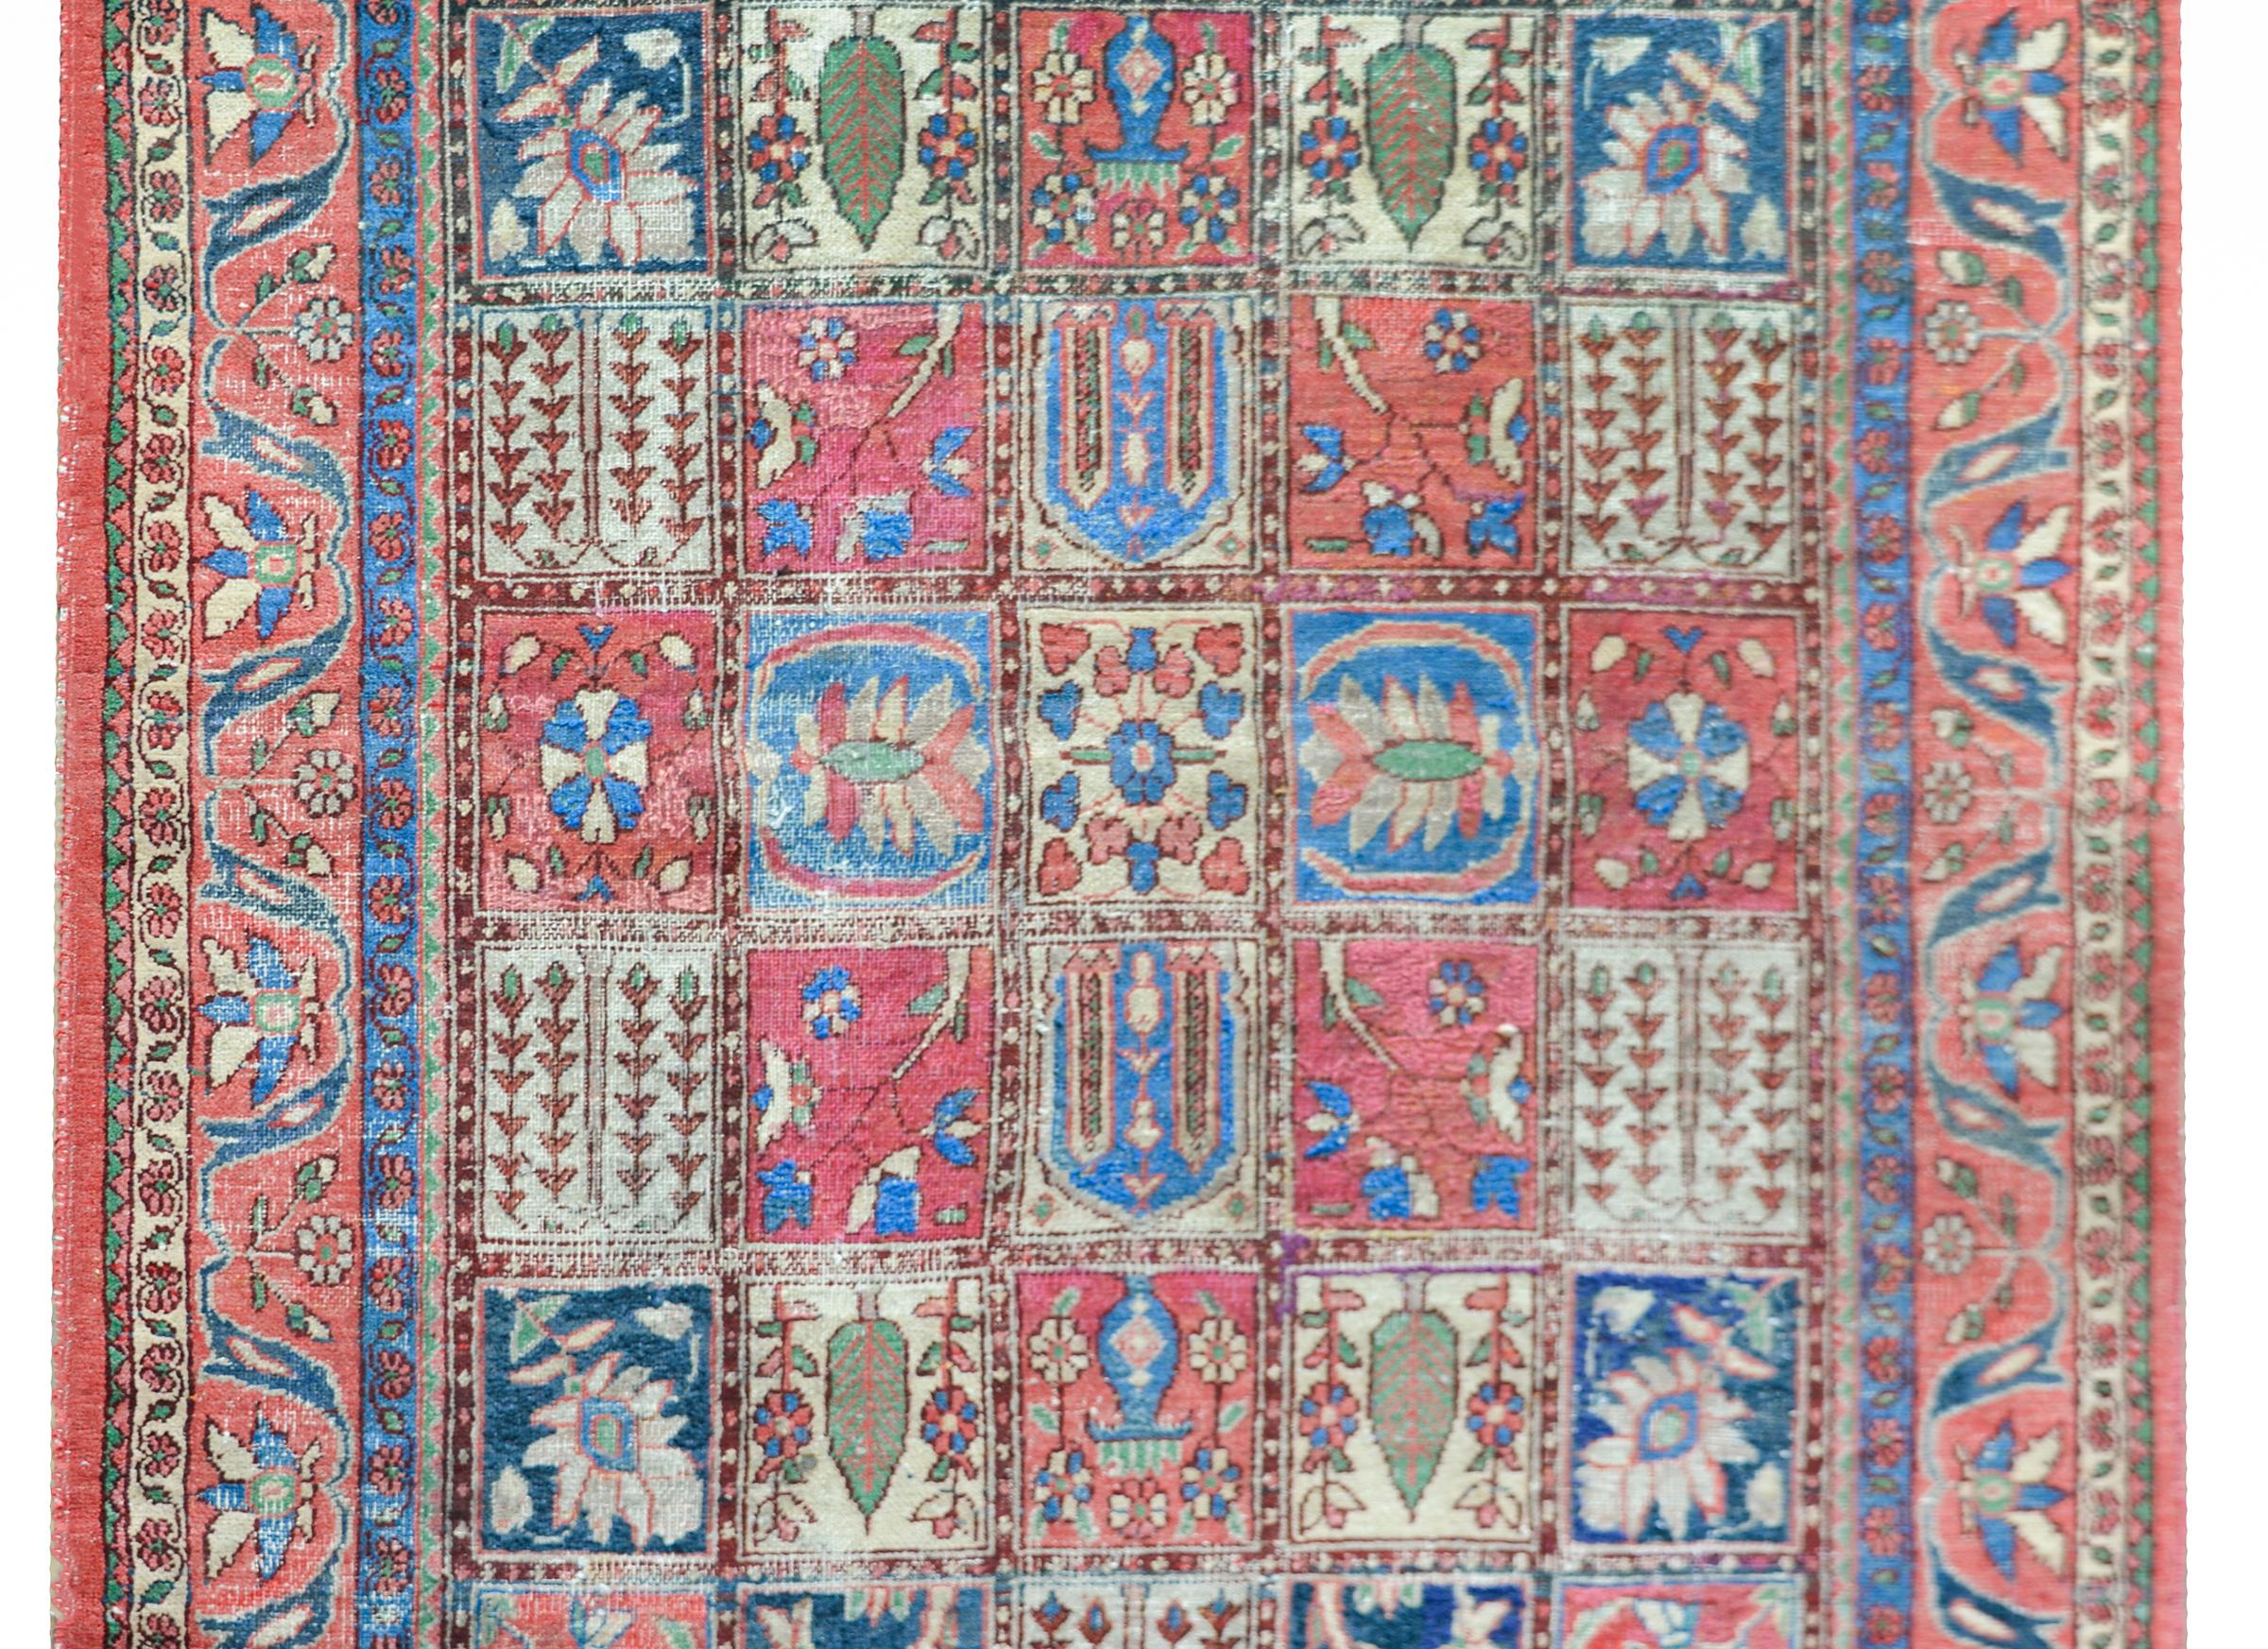 A wonderful mid-20th century Persian Bakhtiari rug with a patchwork pattern composed of a grid of varying floral patterns woven in crimson, indigo, green, and cream, and surrounded by a border with several floral and scrolling vine patterned stripes.